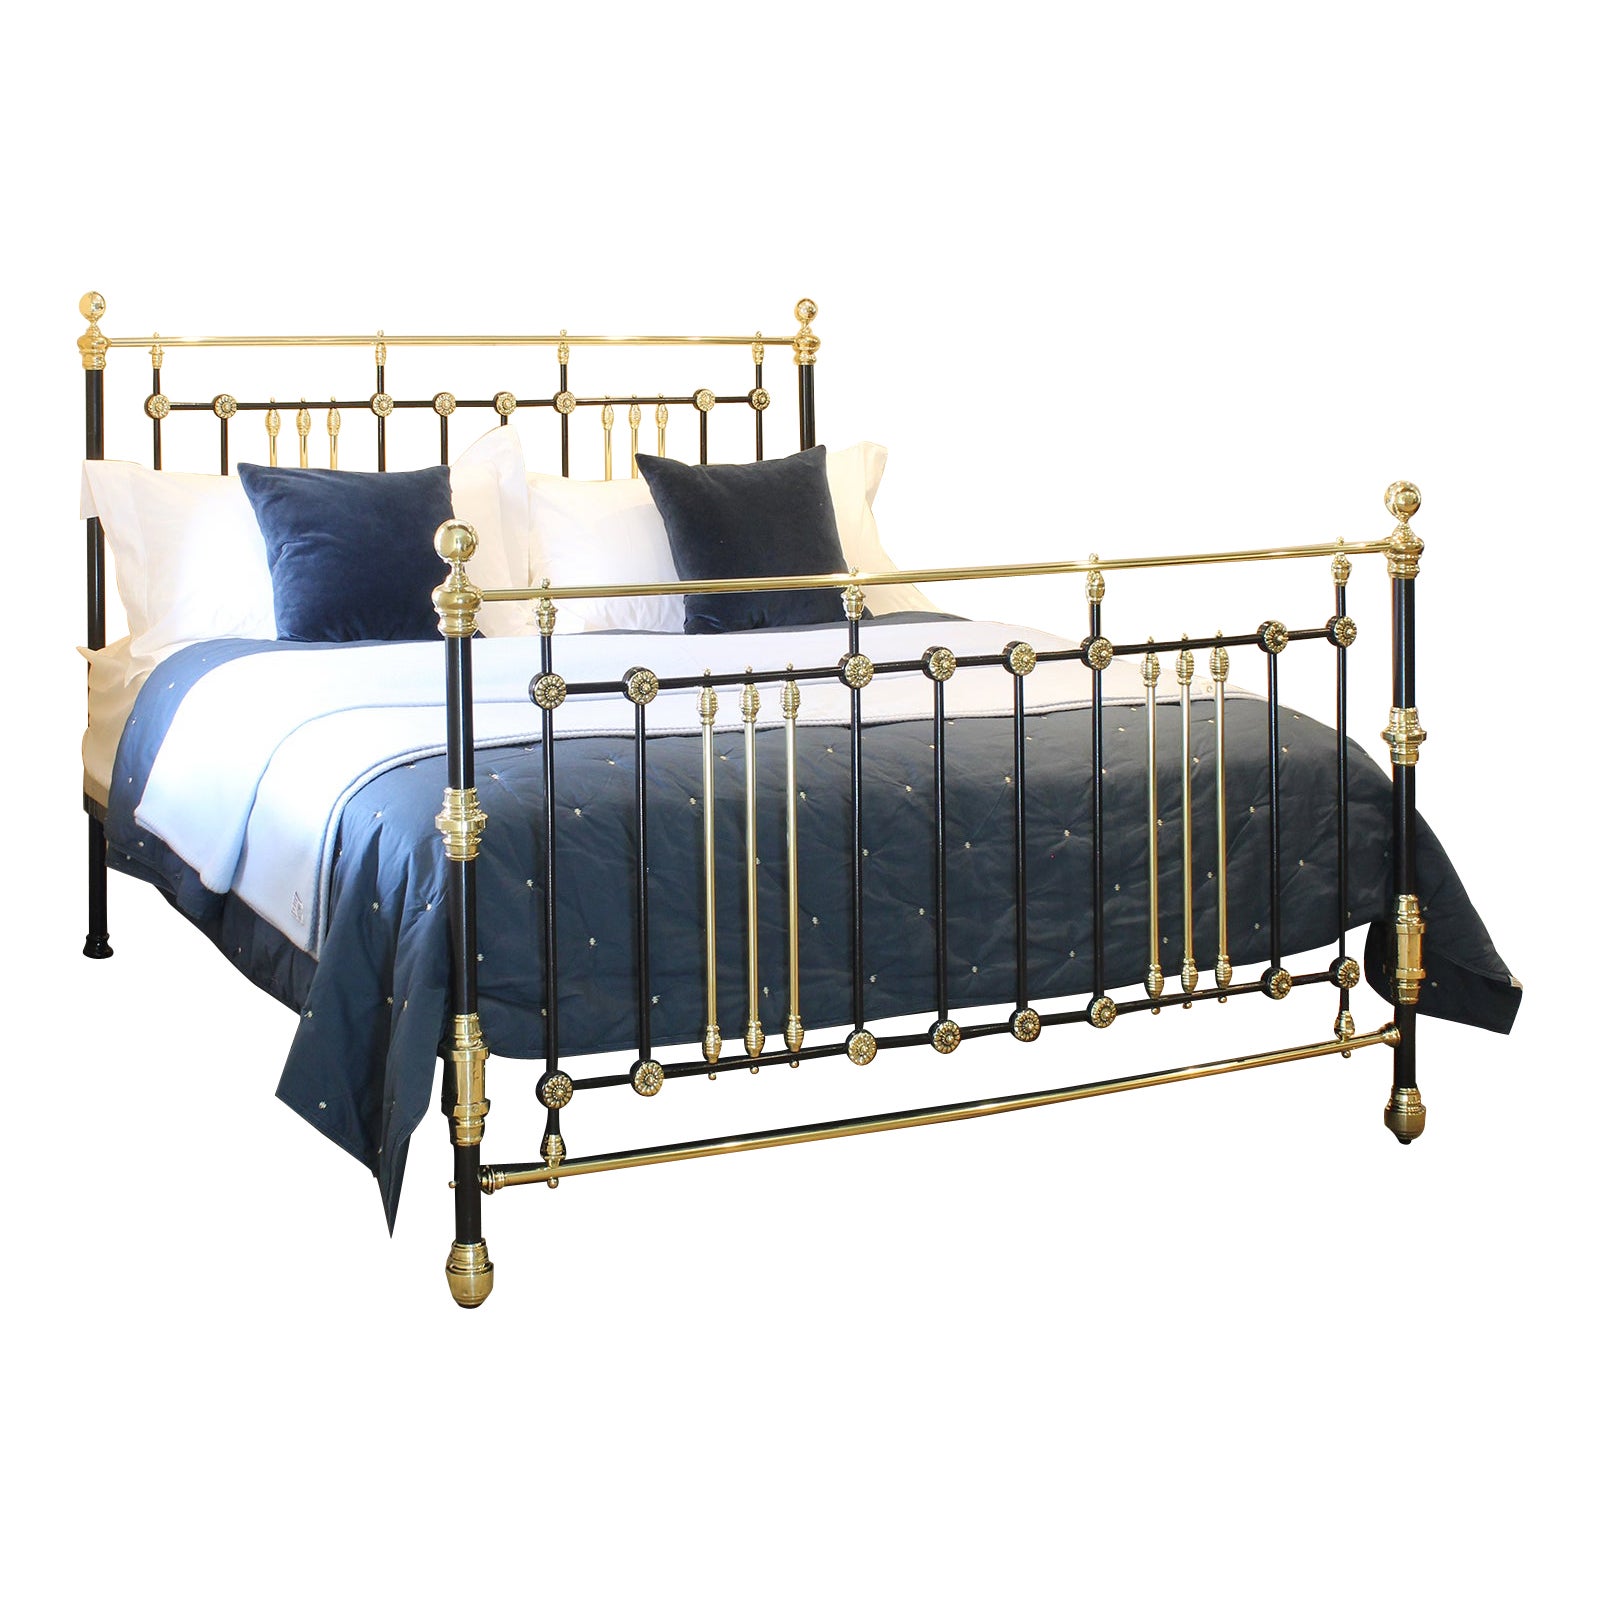 What era are iron beds from?